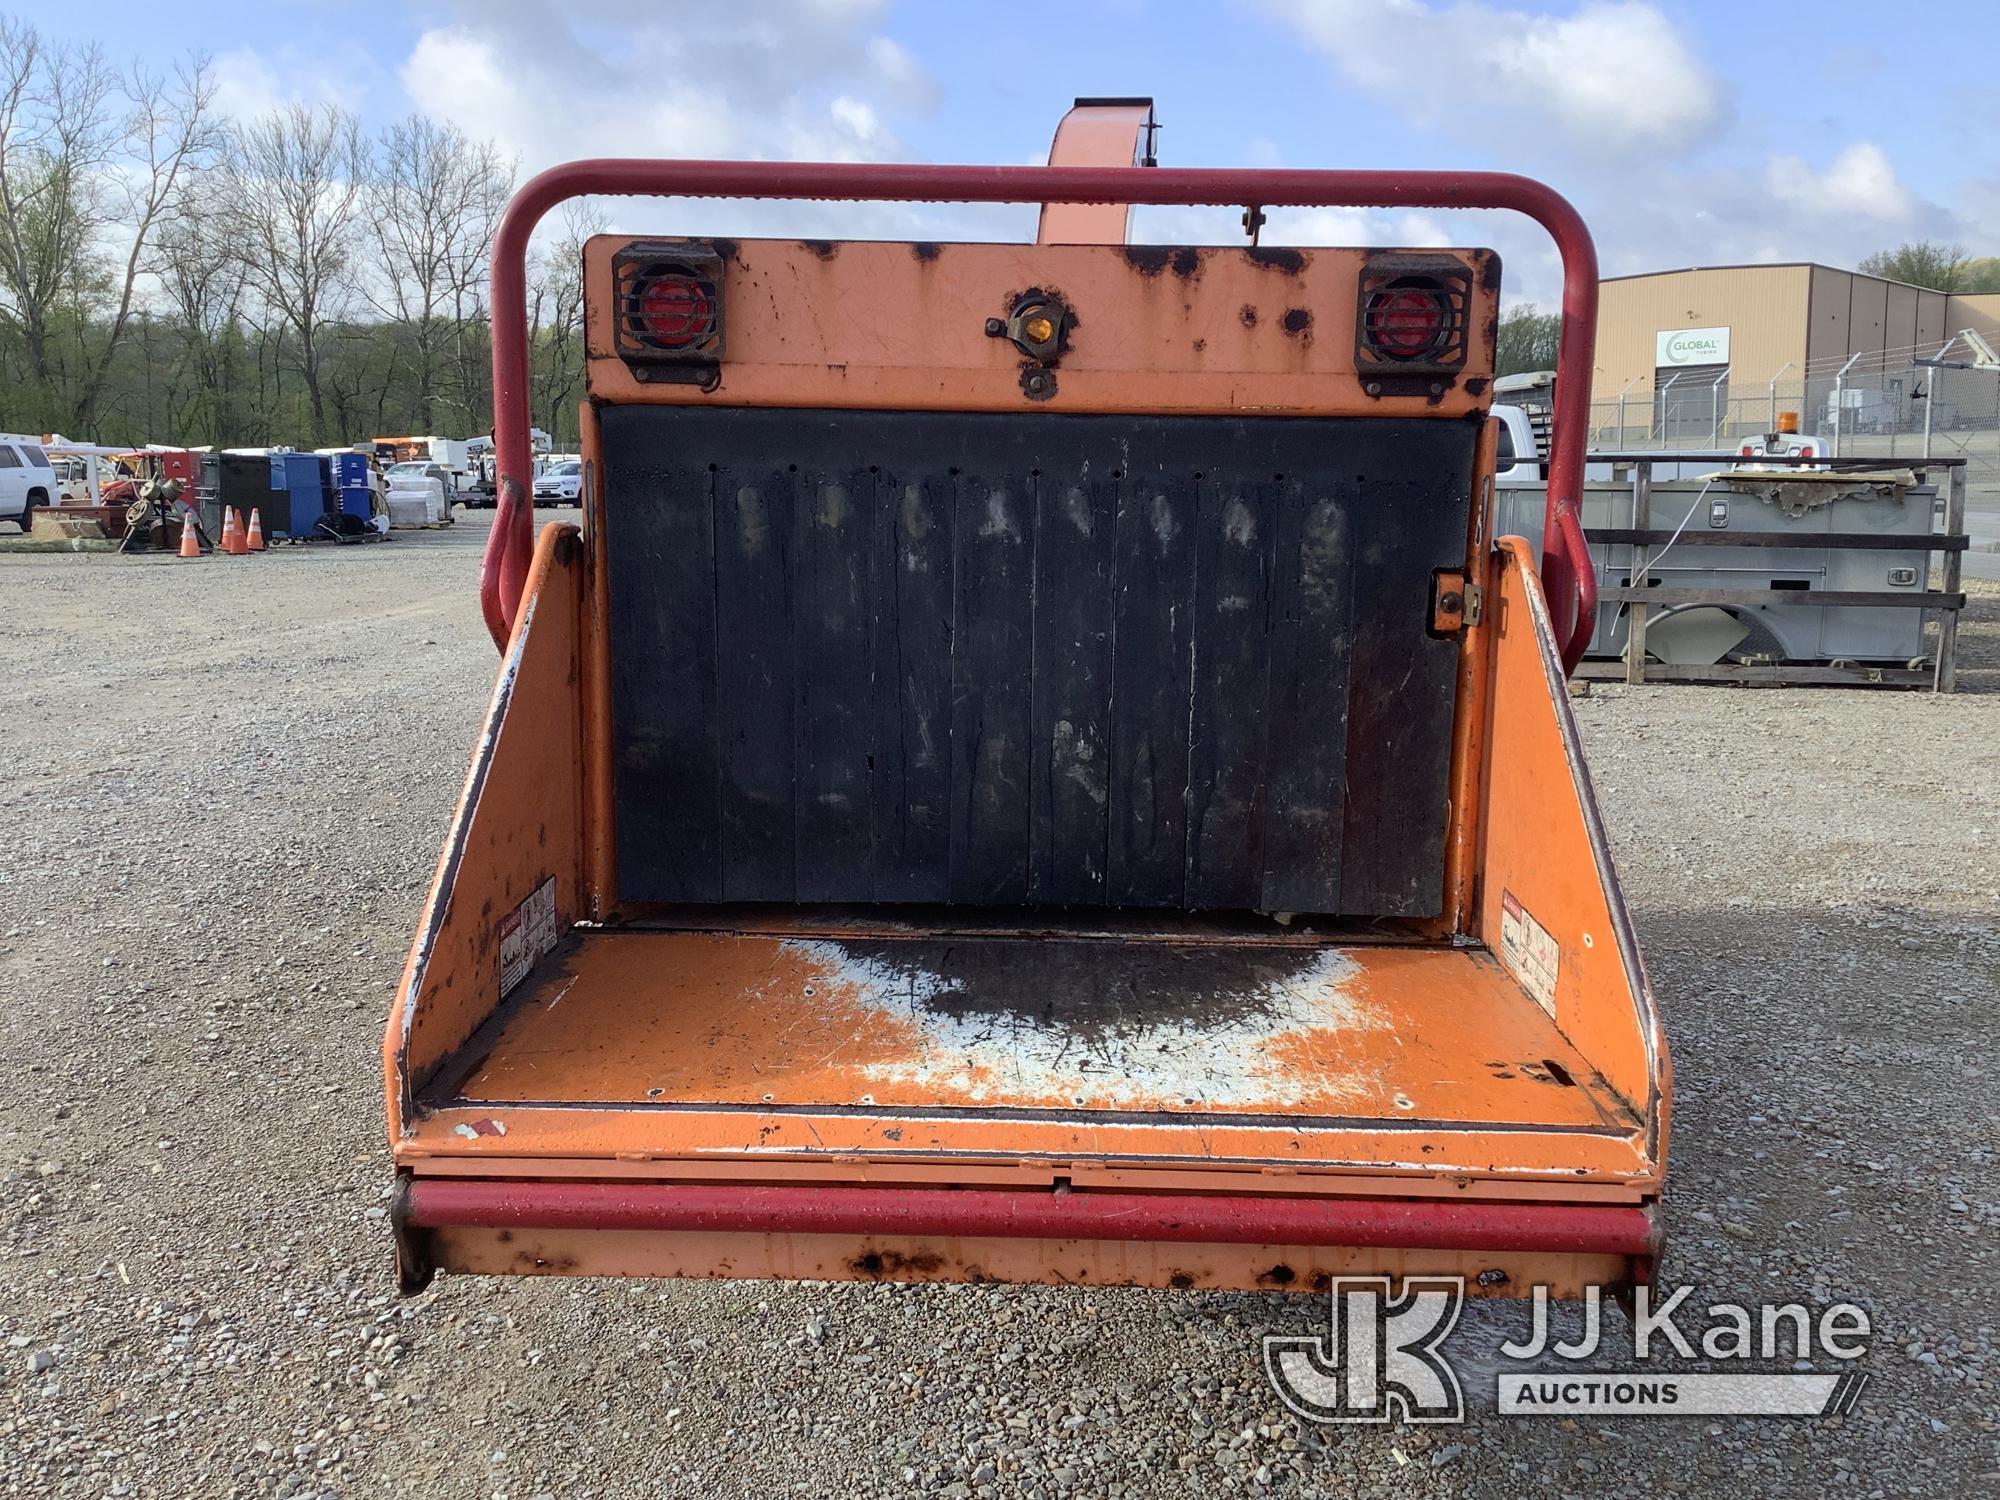 (Smock, PA) 2013 Vermeer BC1000XL Portable Chipper (12in Drum) No Title, Not Running, Operational Co